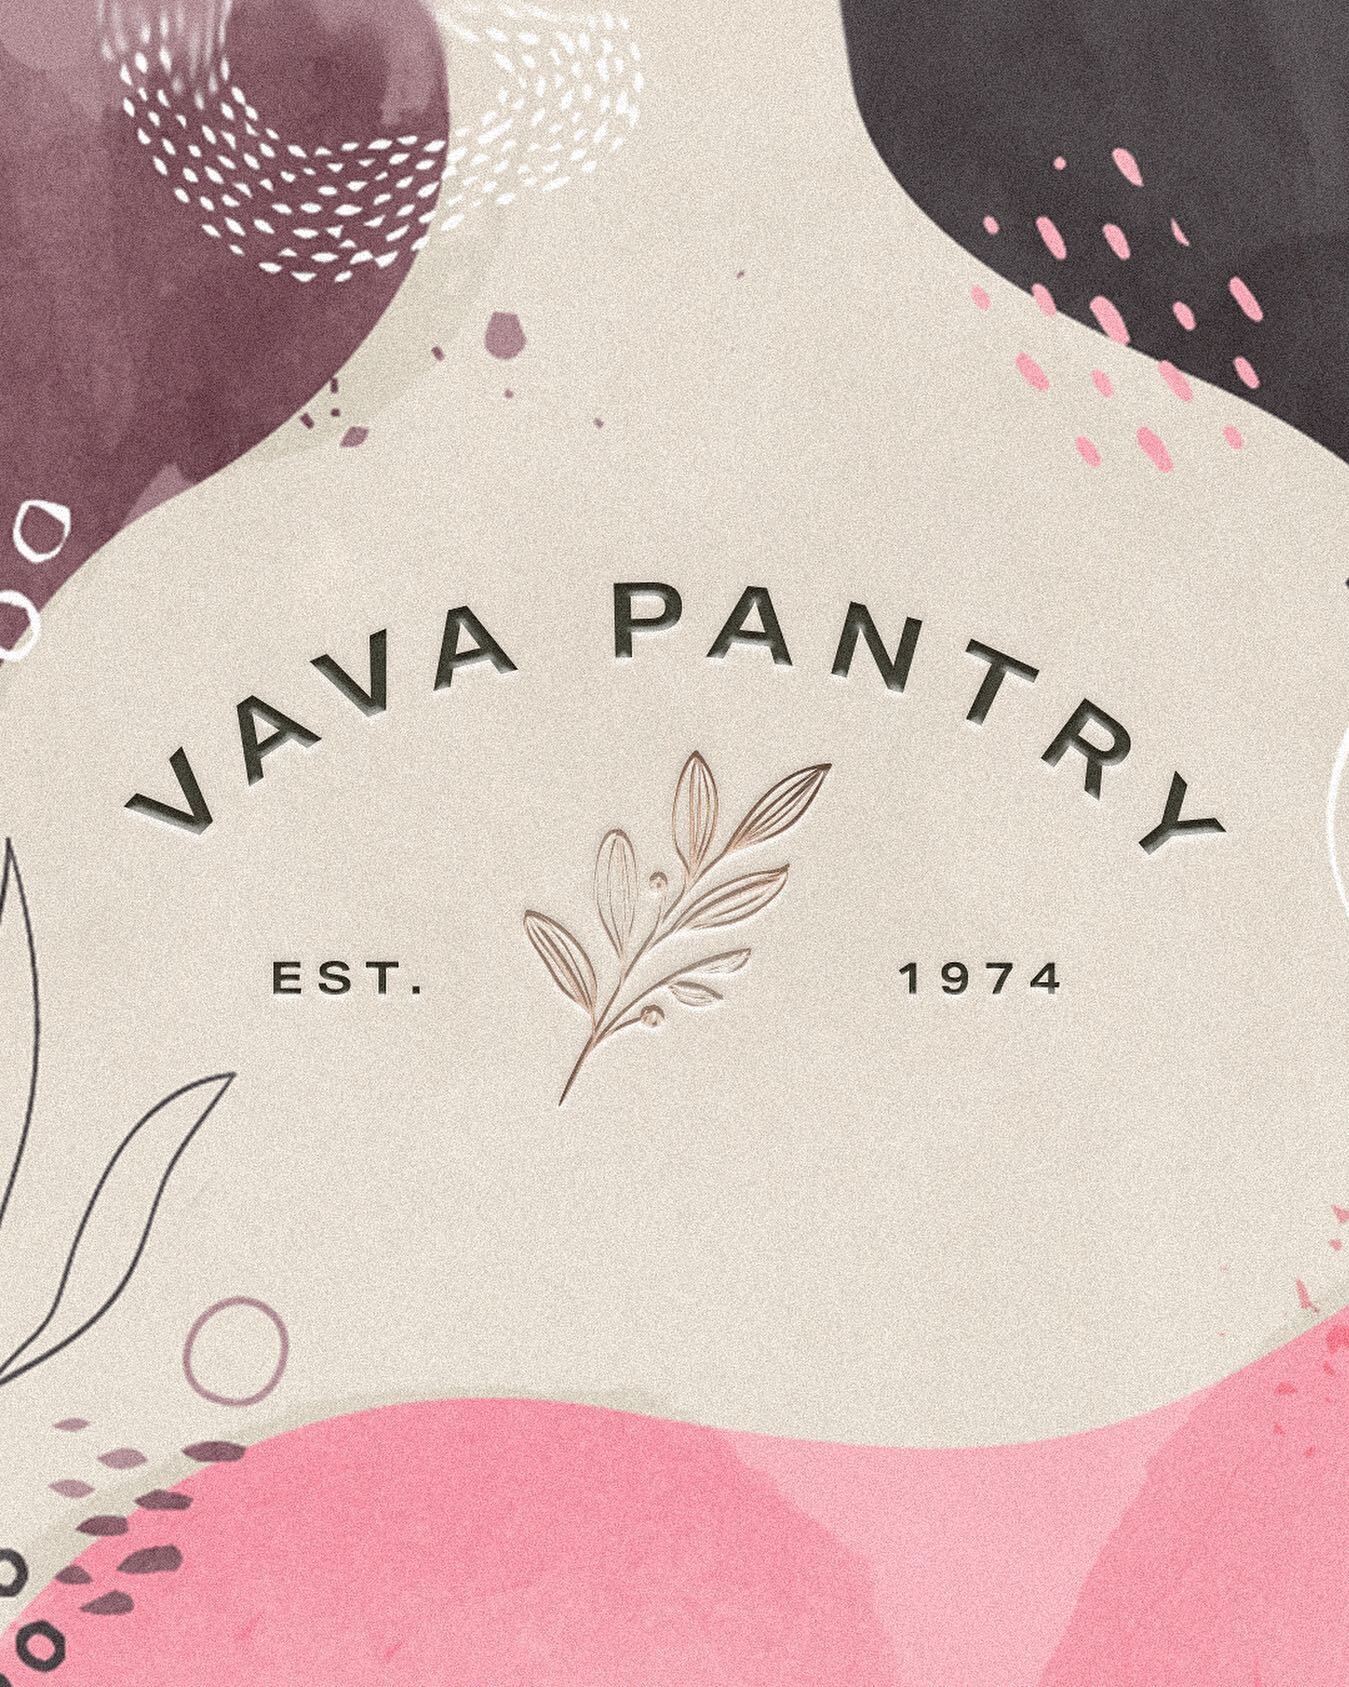 Brand Identity for @vavapantry 
Spanning over 3 generations since 1974. Recognised for their value of accessible, high quality, nourishing, plant-based foods.
#branding #brand #brandidentity #design #graphicdesign #logo